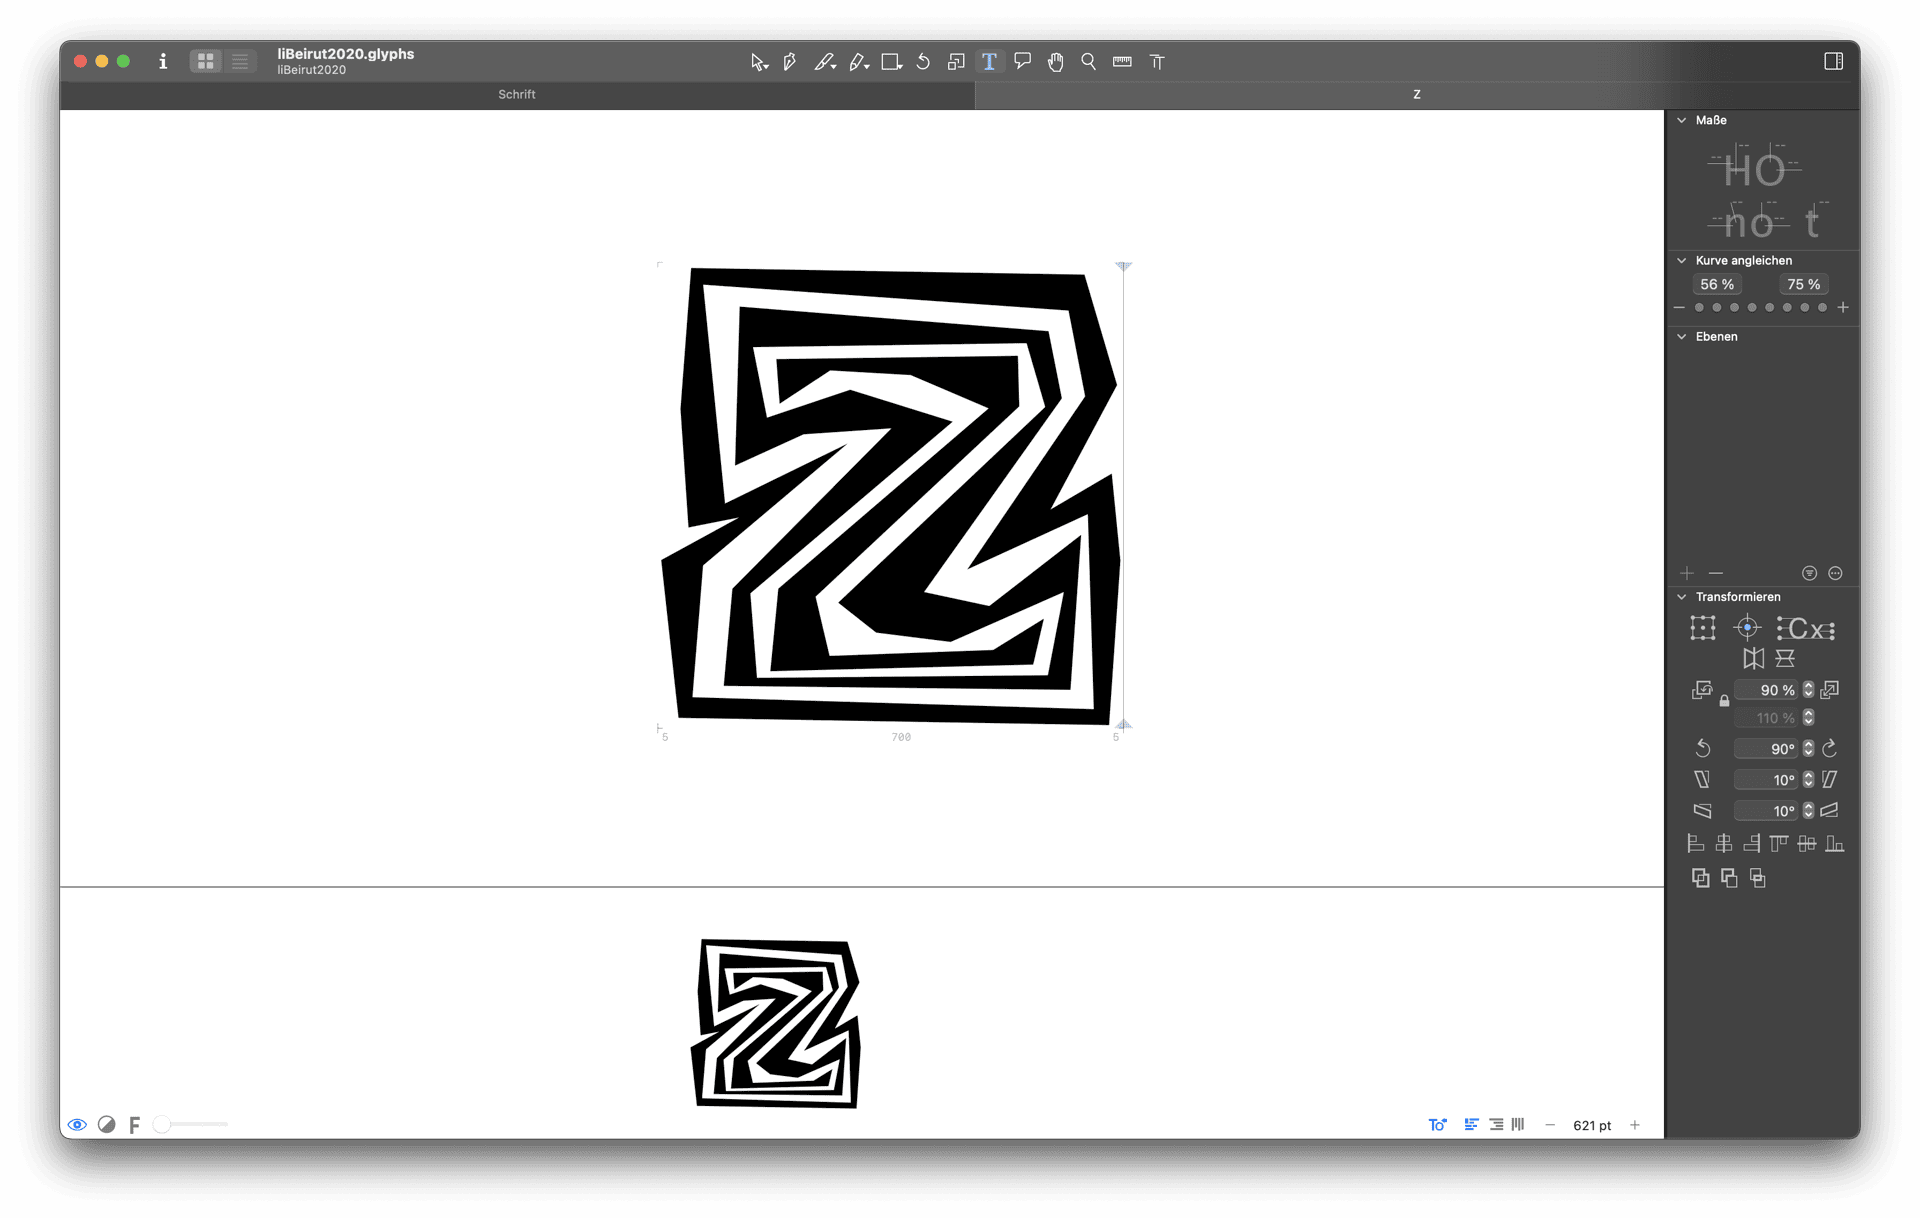 A screenshot of the font design software Glyphs. It shows the letter z drawn in edged shapes in multiple layers.